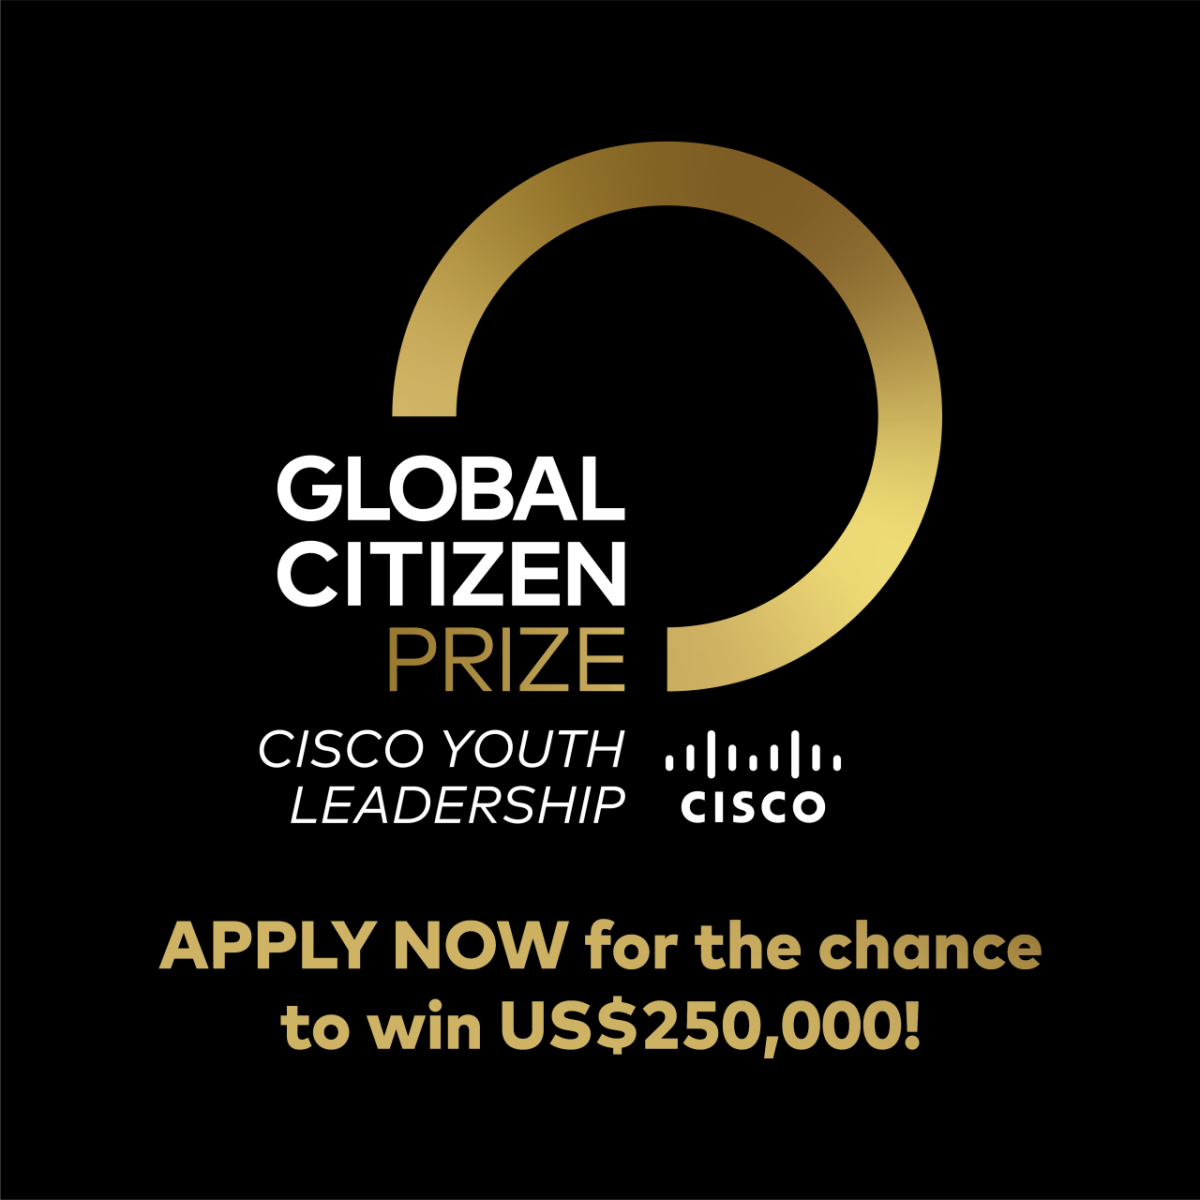 Global Citizen Prize, Cisco Youth Leadership. APPLY NOW for the chance to win US$250,000!